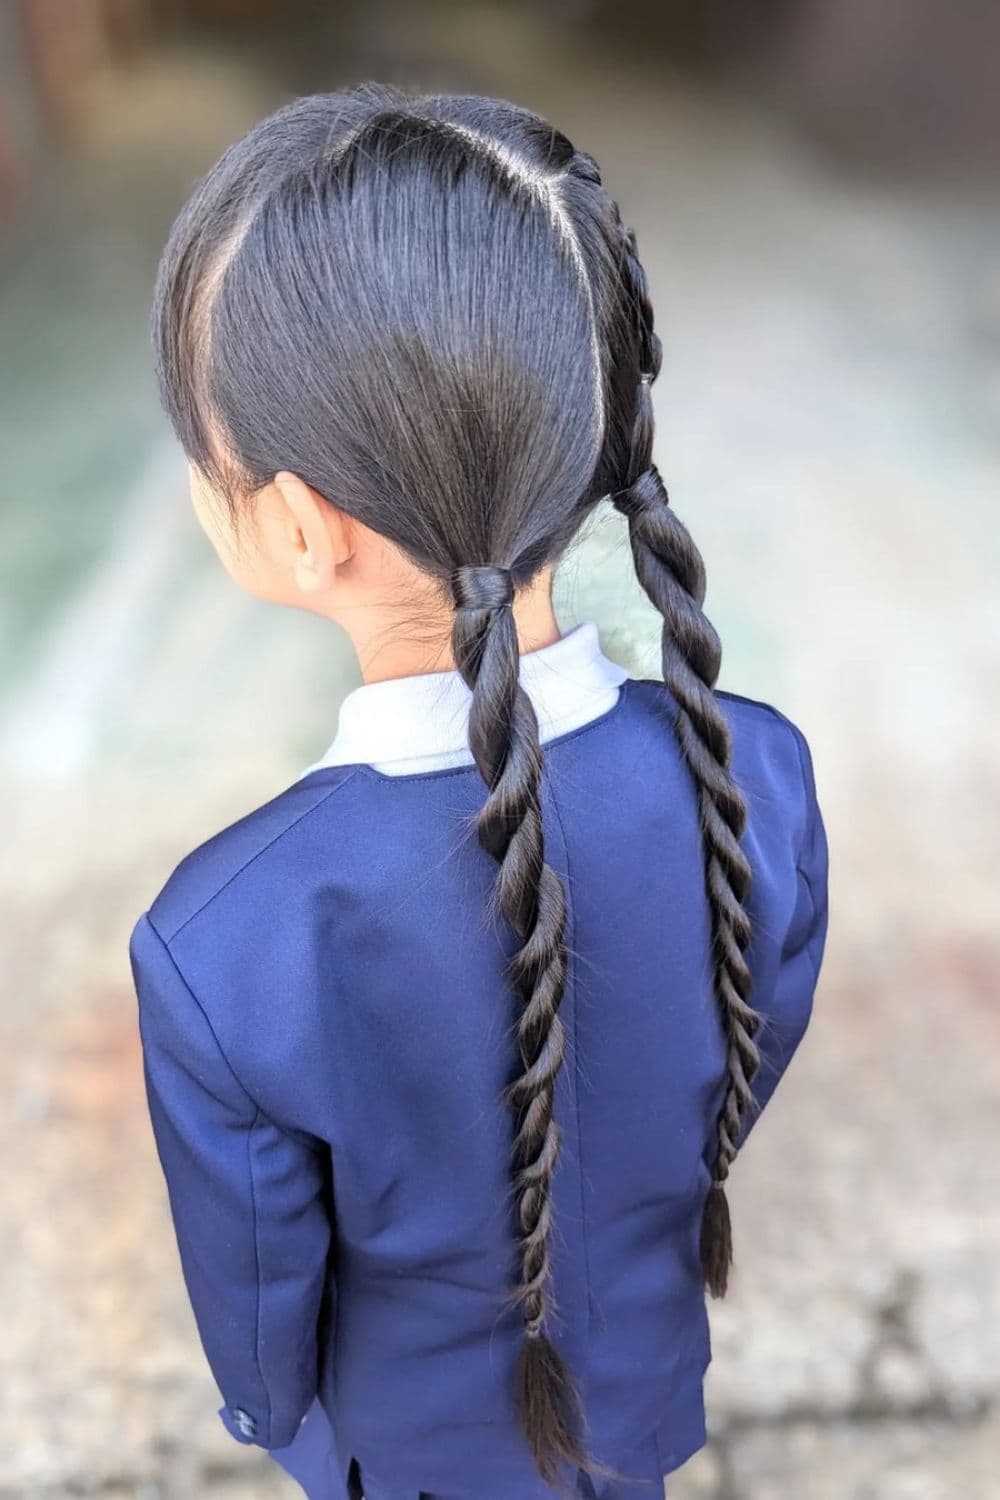 A girl wearing a Japanese uniform with a black rope braid.